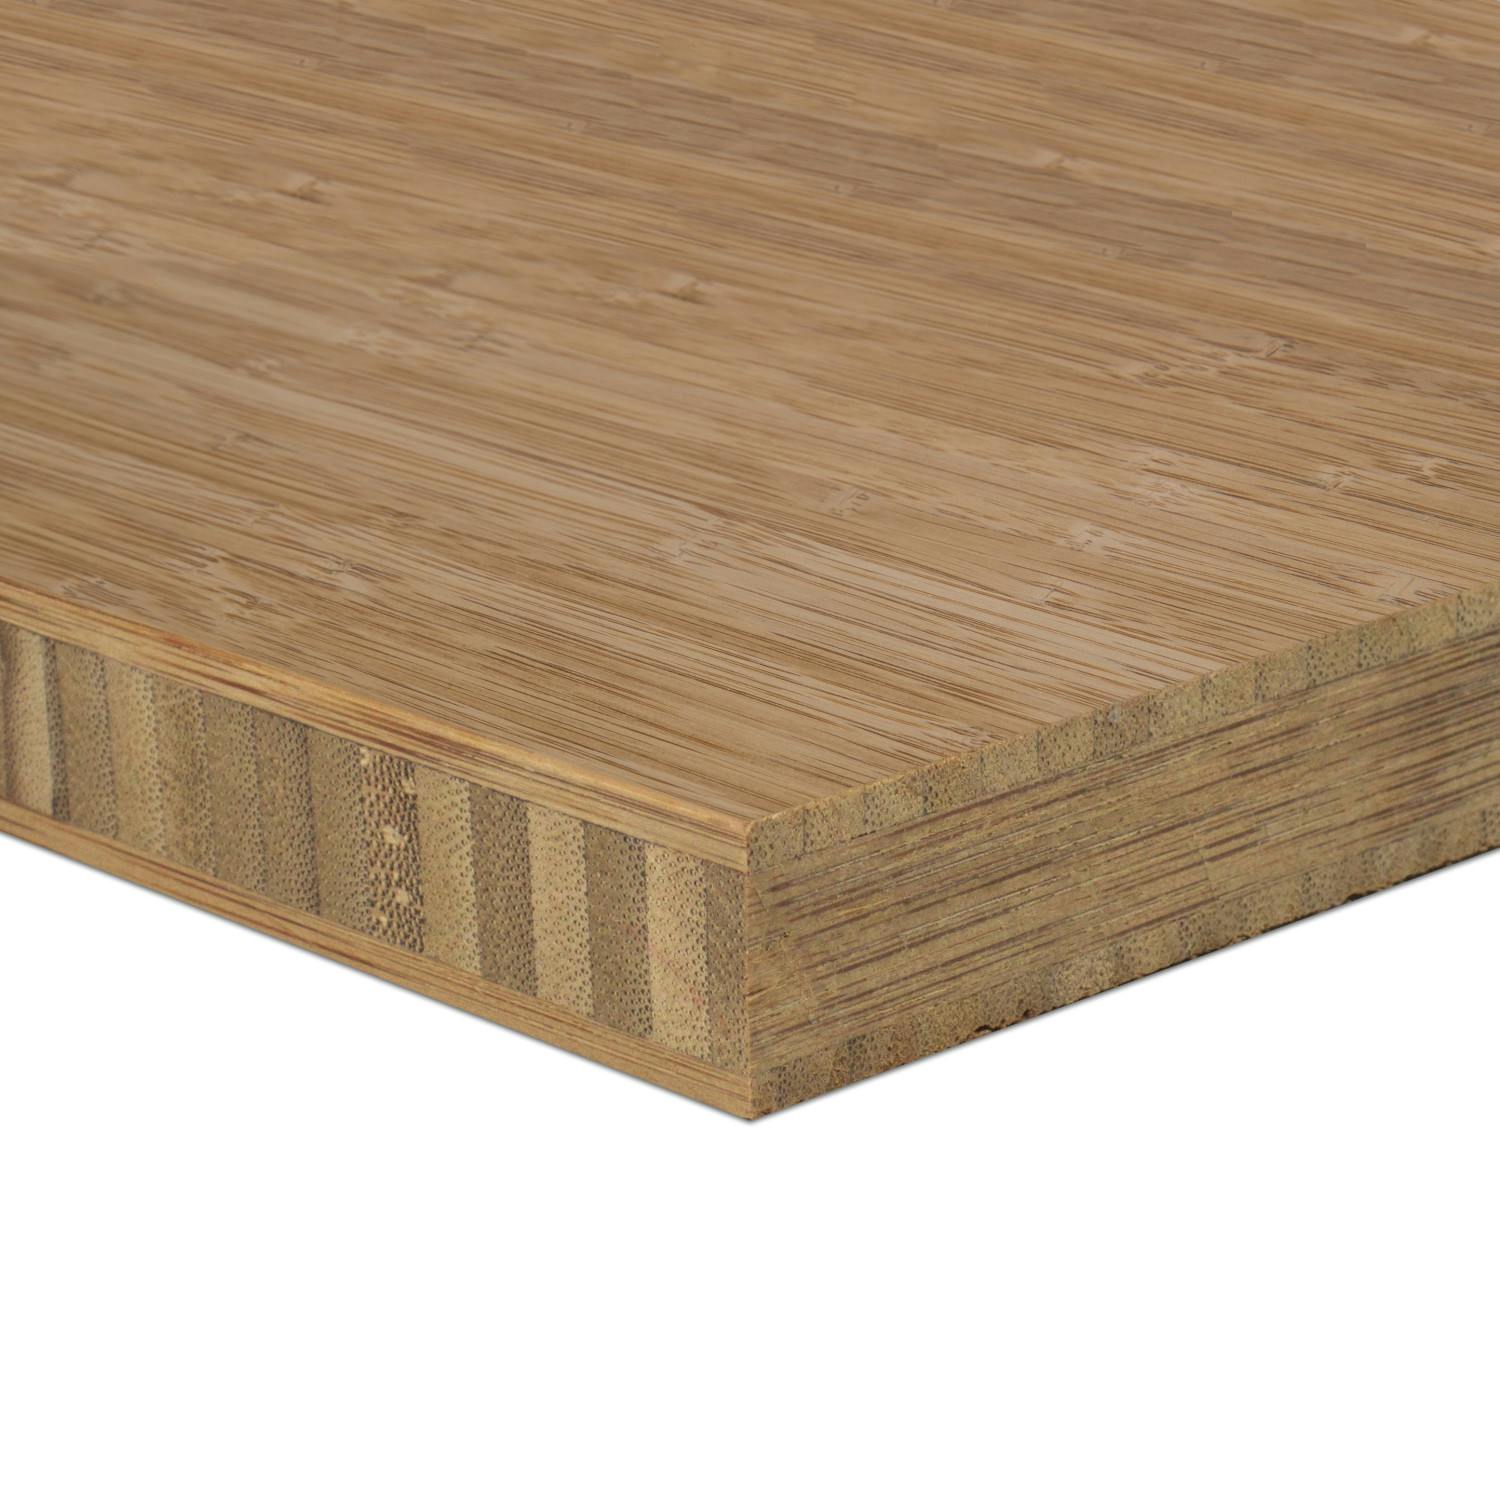 Bamboo Plywood - 3ply 3/4 in. Vertical Carbonized